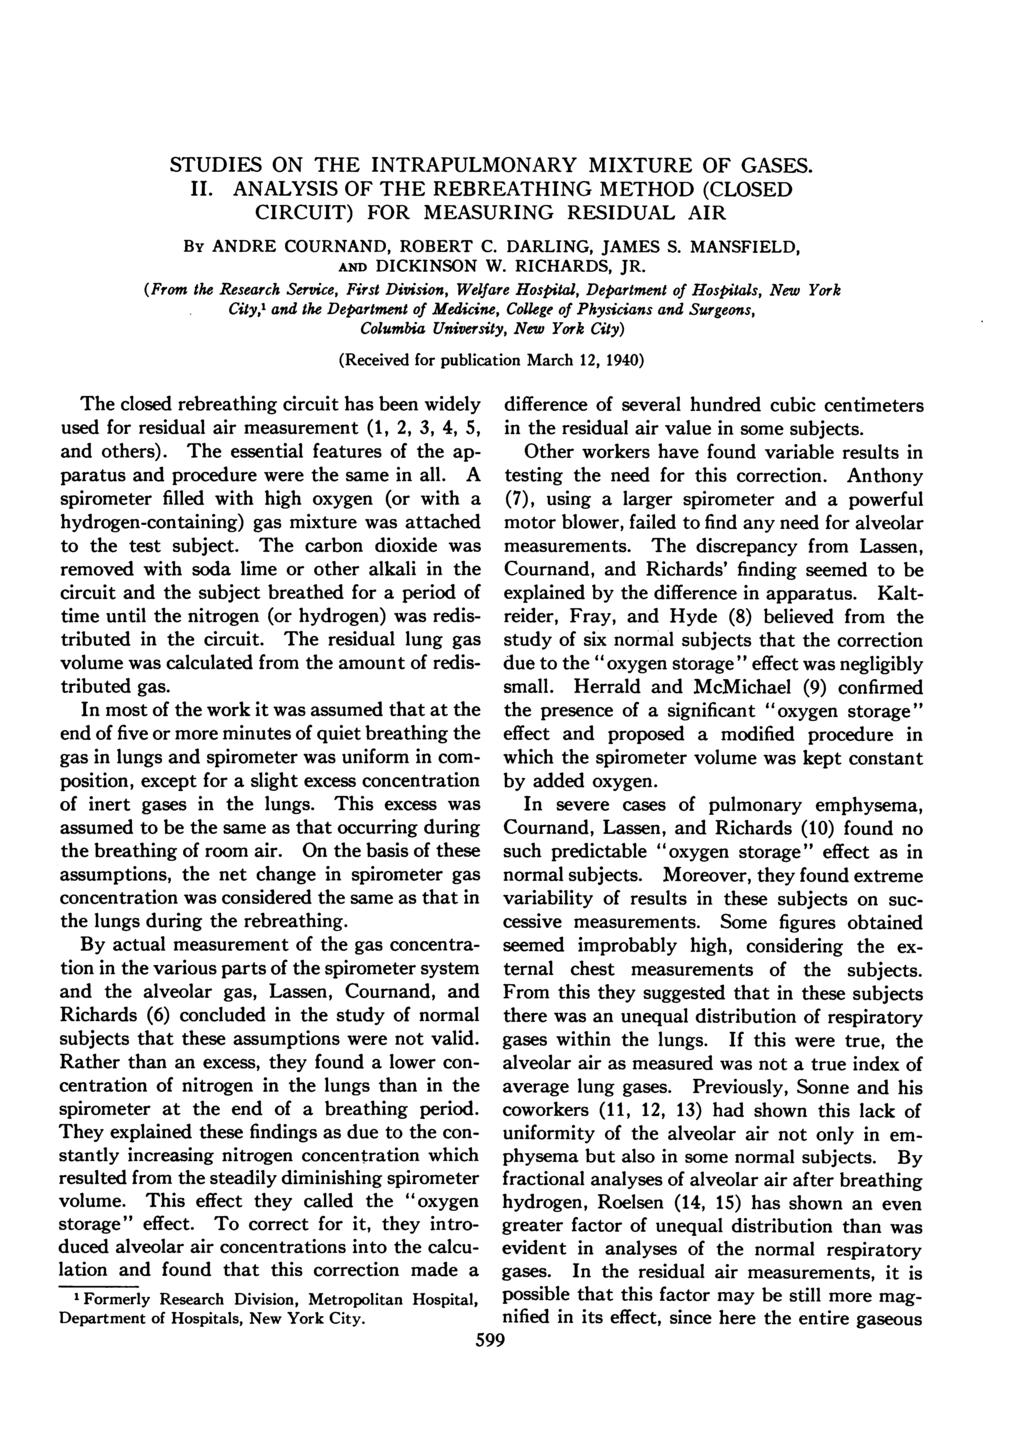 STUDIES ON THE INTRAPULMONARY MIXTURE OF GASES. II. ANALYSIS OF THE REBREATHING METHOD (CLOSED CIRCUIT) FOR MEASURING RESIDUAL AIR By ANDRE COURNAND, ROBERT C. DARLING, JAMES S.